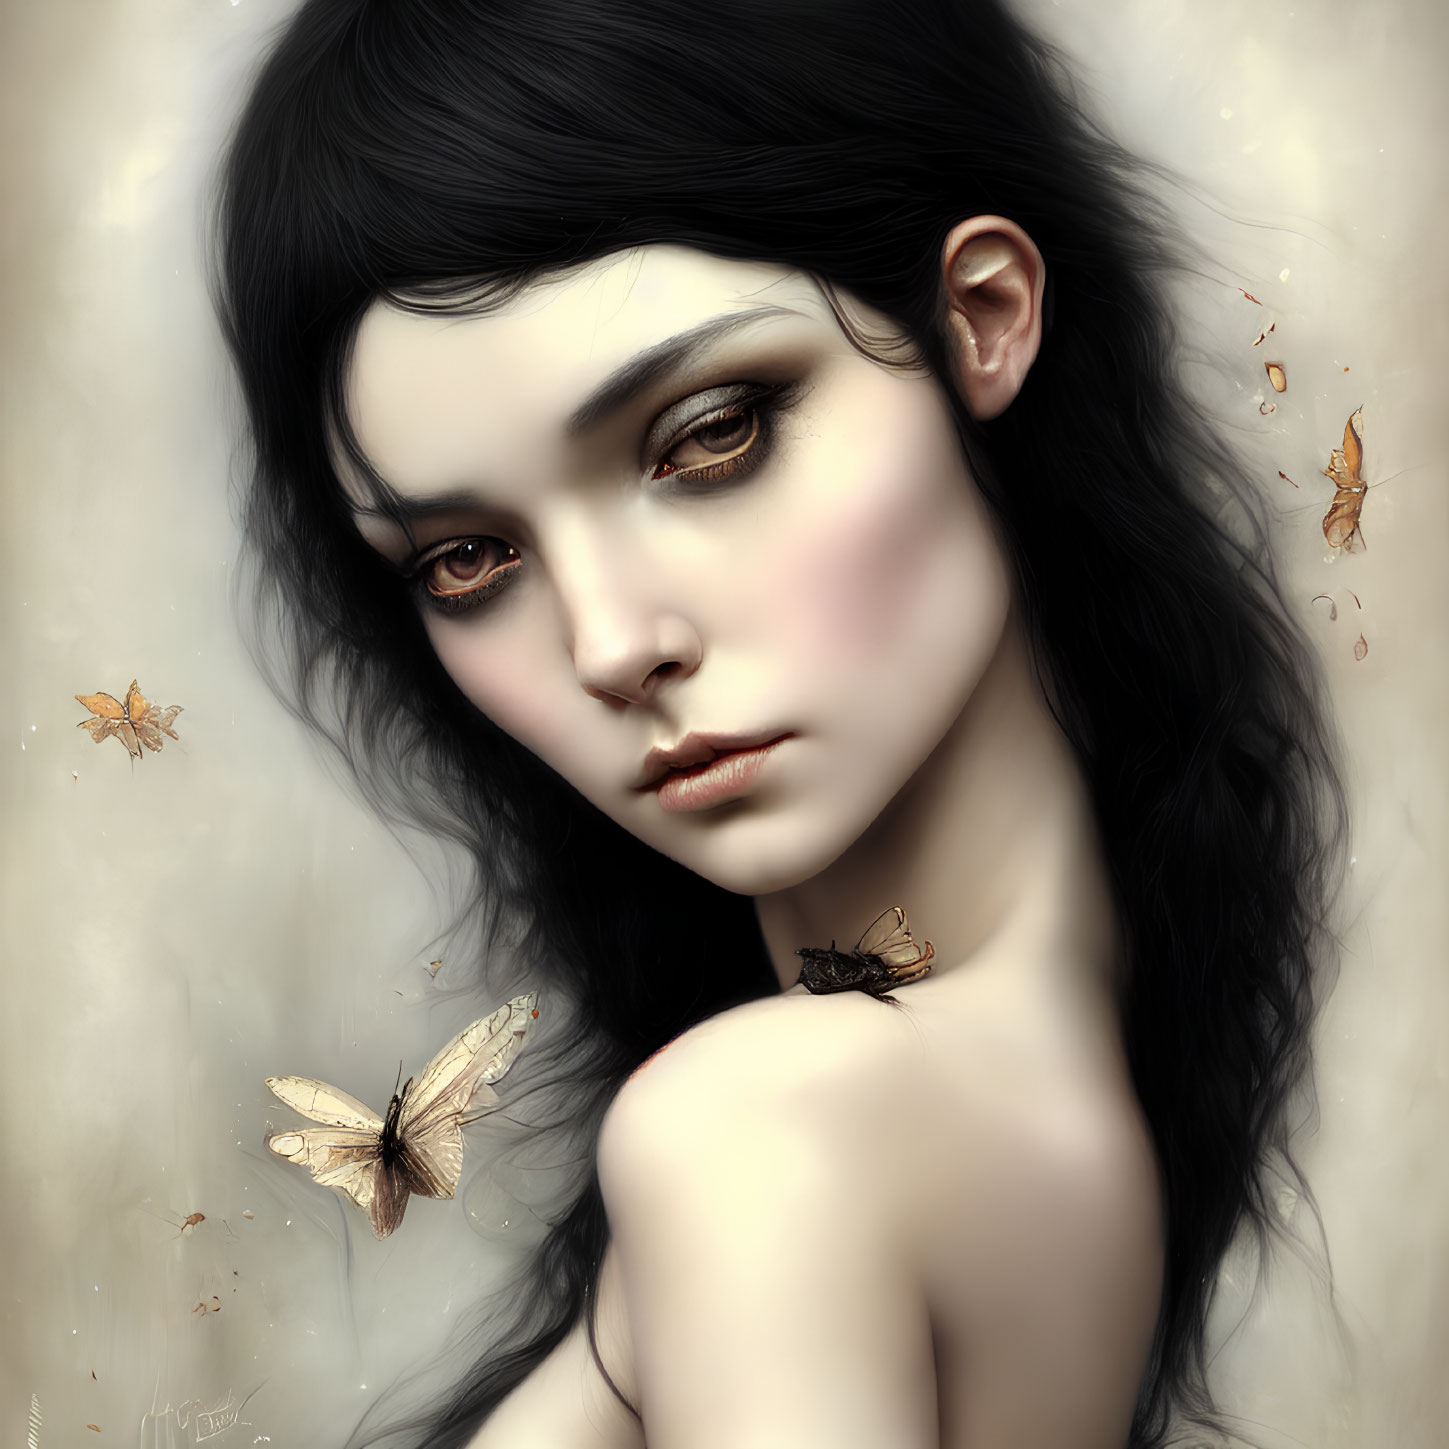 Pale-skinned woman with dark hair and striking eyes surrounded by butterflies on beige background